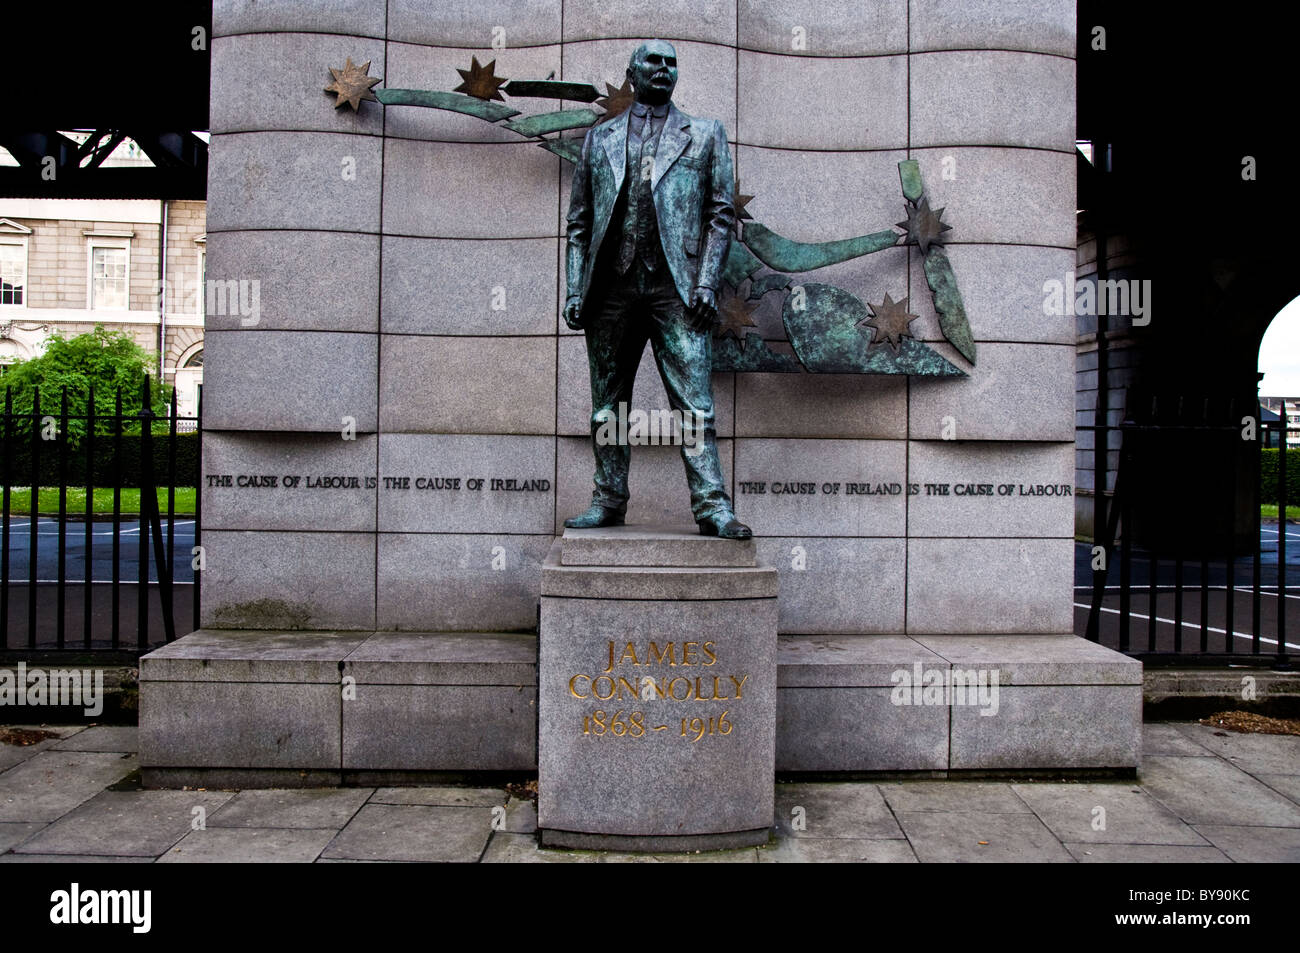 Statue of James Connolly in Beresford Place Dublin Stock Photo